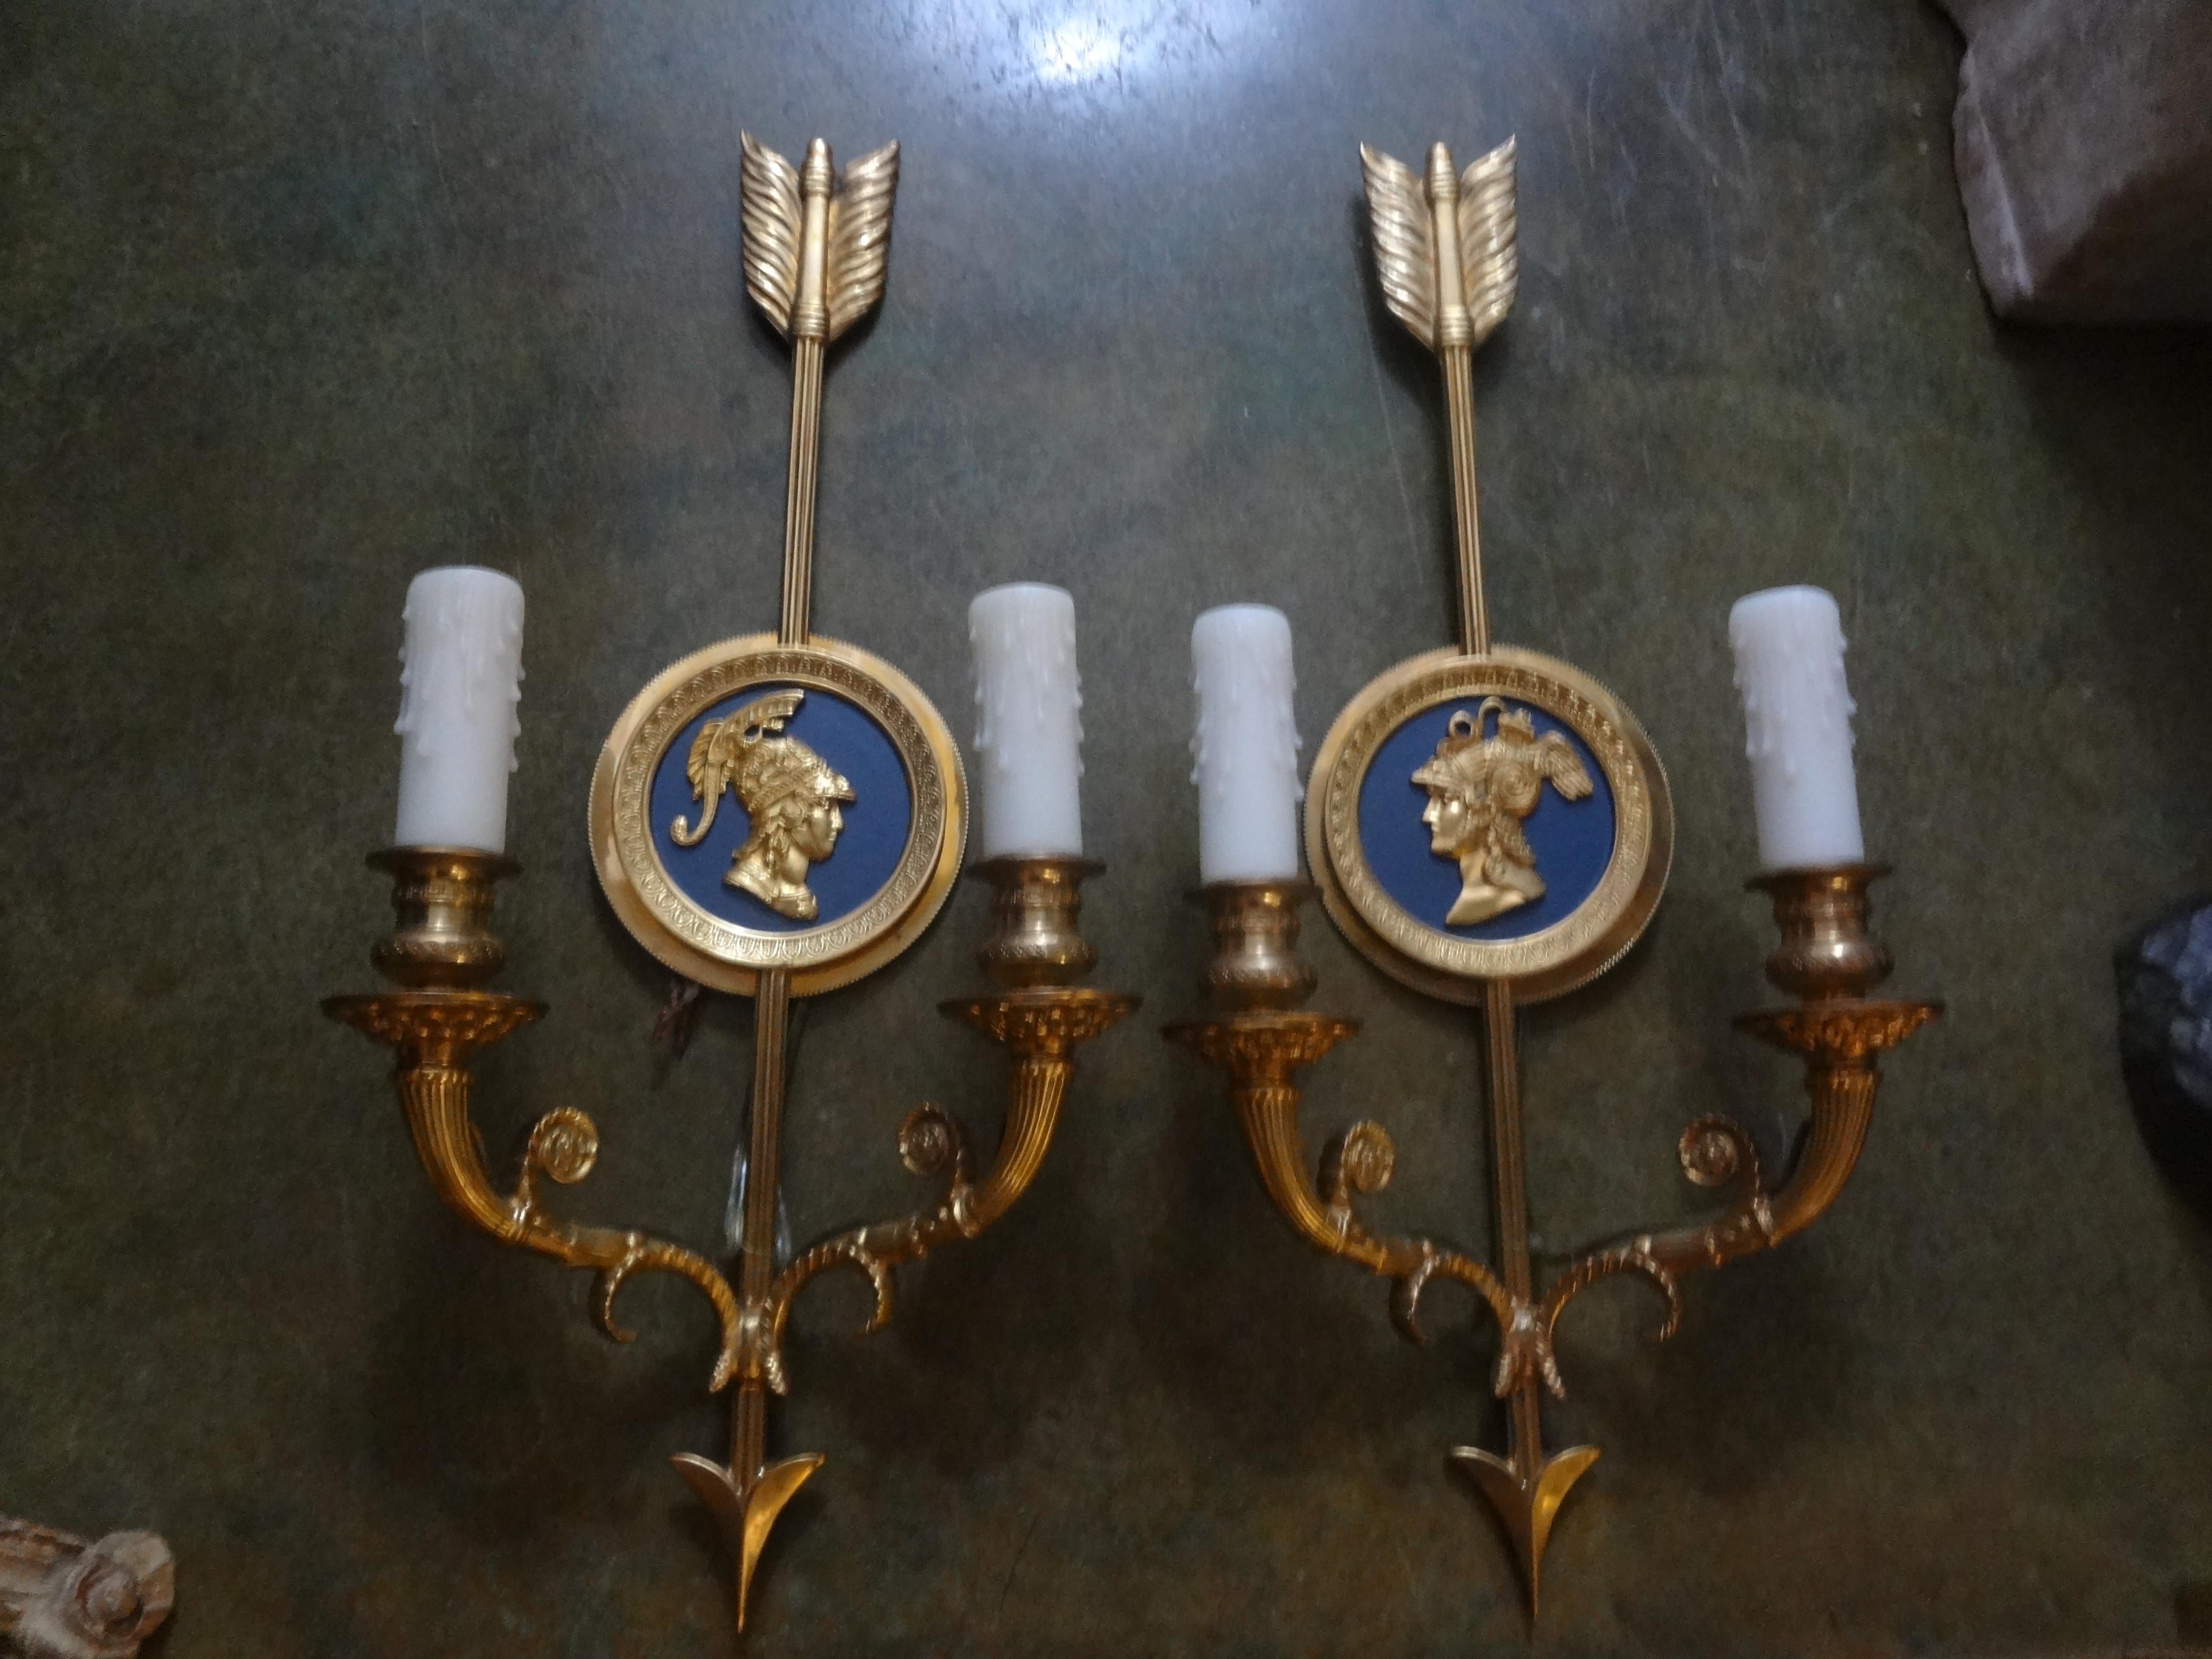 Fabulous pair of Italian Maison Jansen style, neoclassical or Empire style two-light brass sconces with arrows and opposing center medallion figures. This stunning pair of Italian neoclassic beautifully chased brass sconces are marked Italy on the